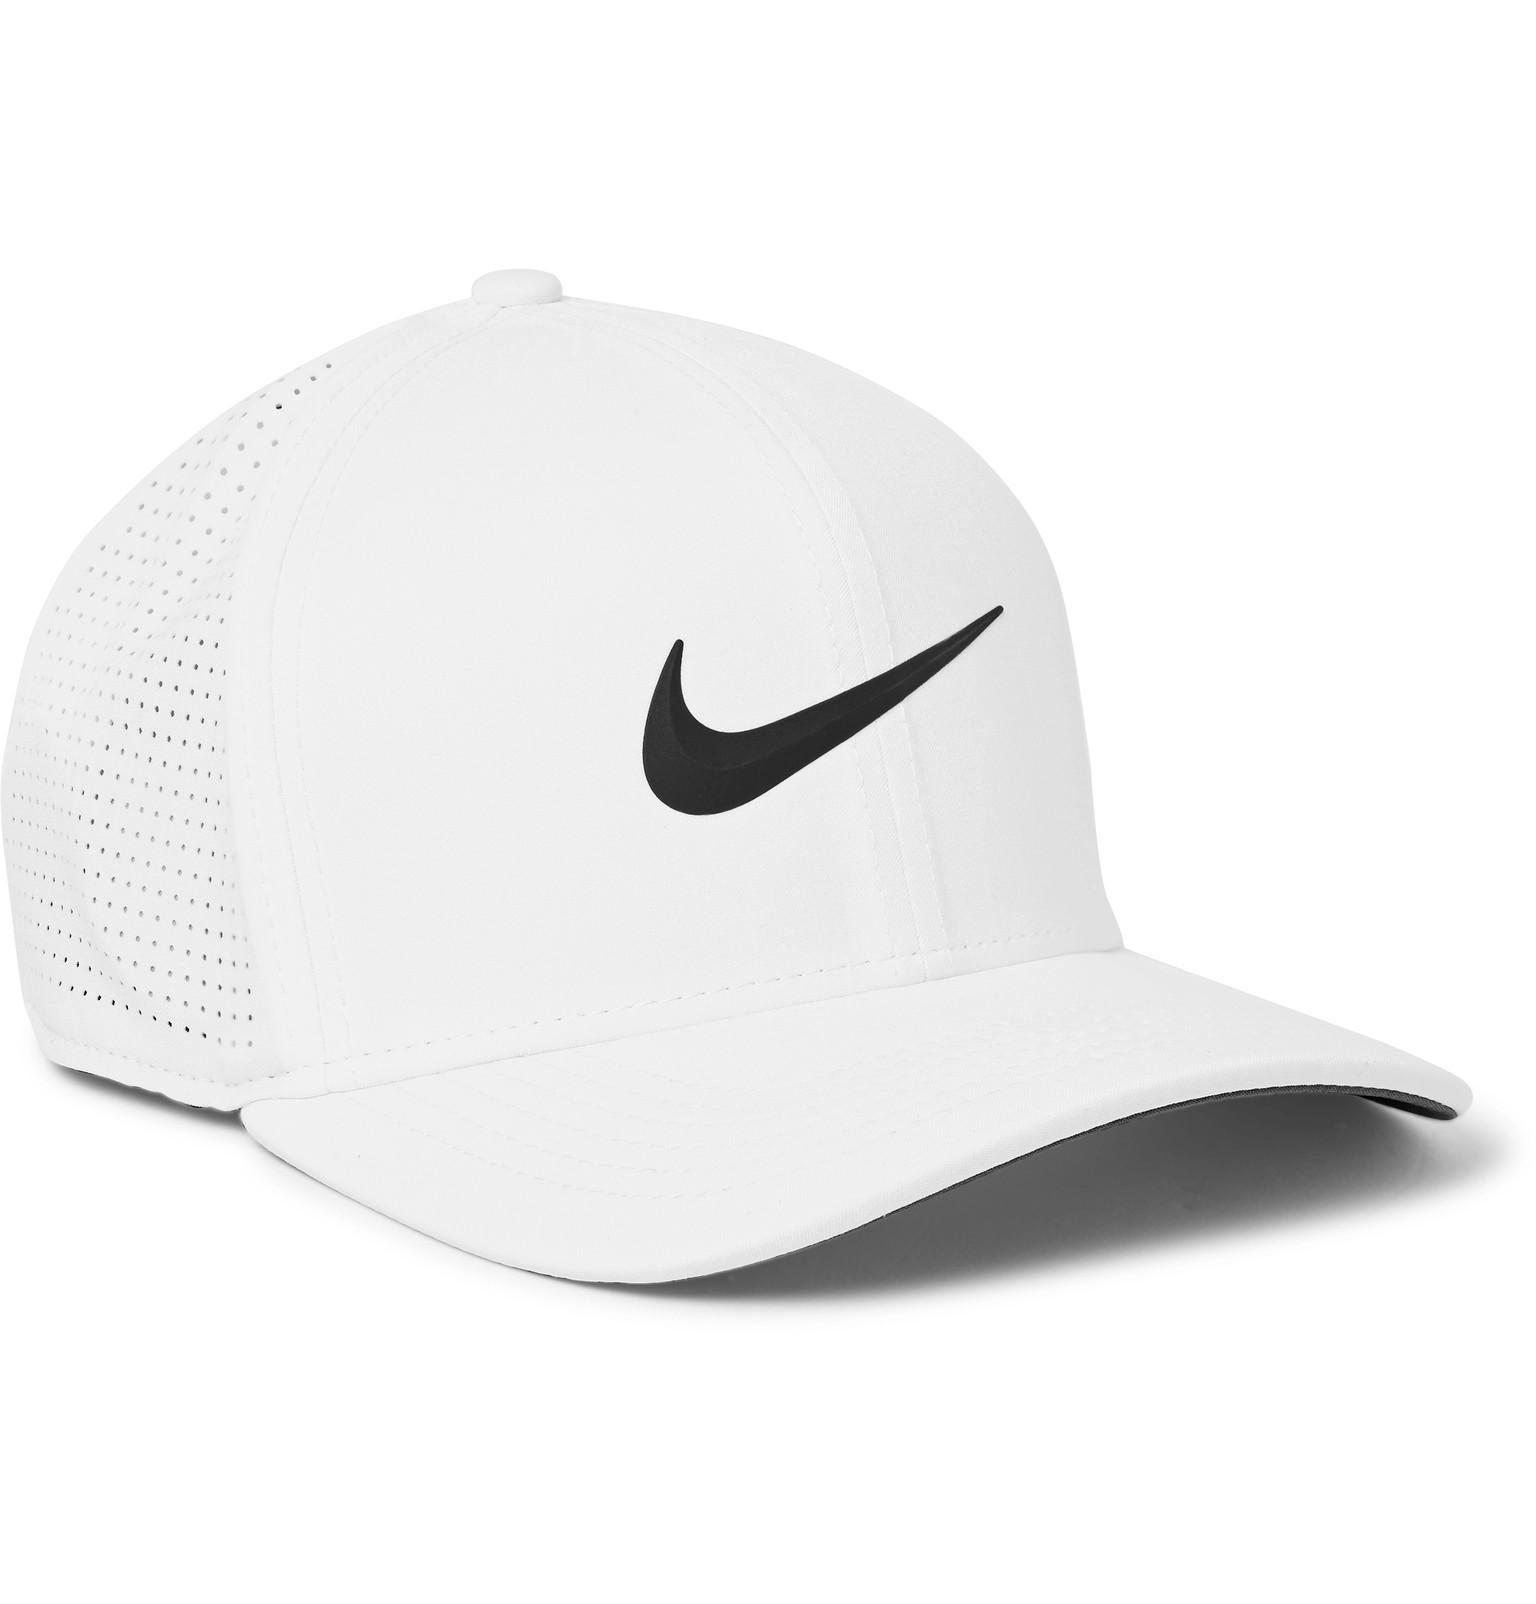 Nike Synthetic Aerobill Classic 99 Perforated Dri-fit Golf Cap in White for  Men - Lyst